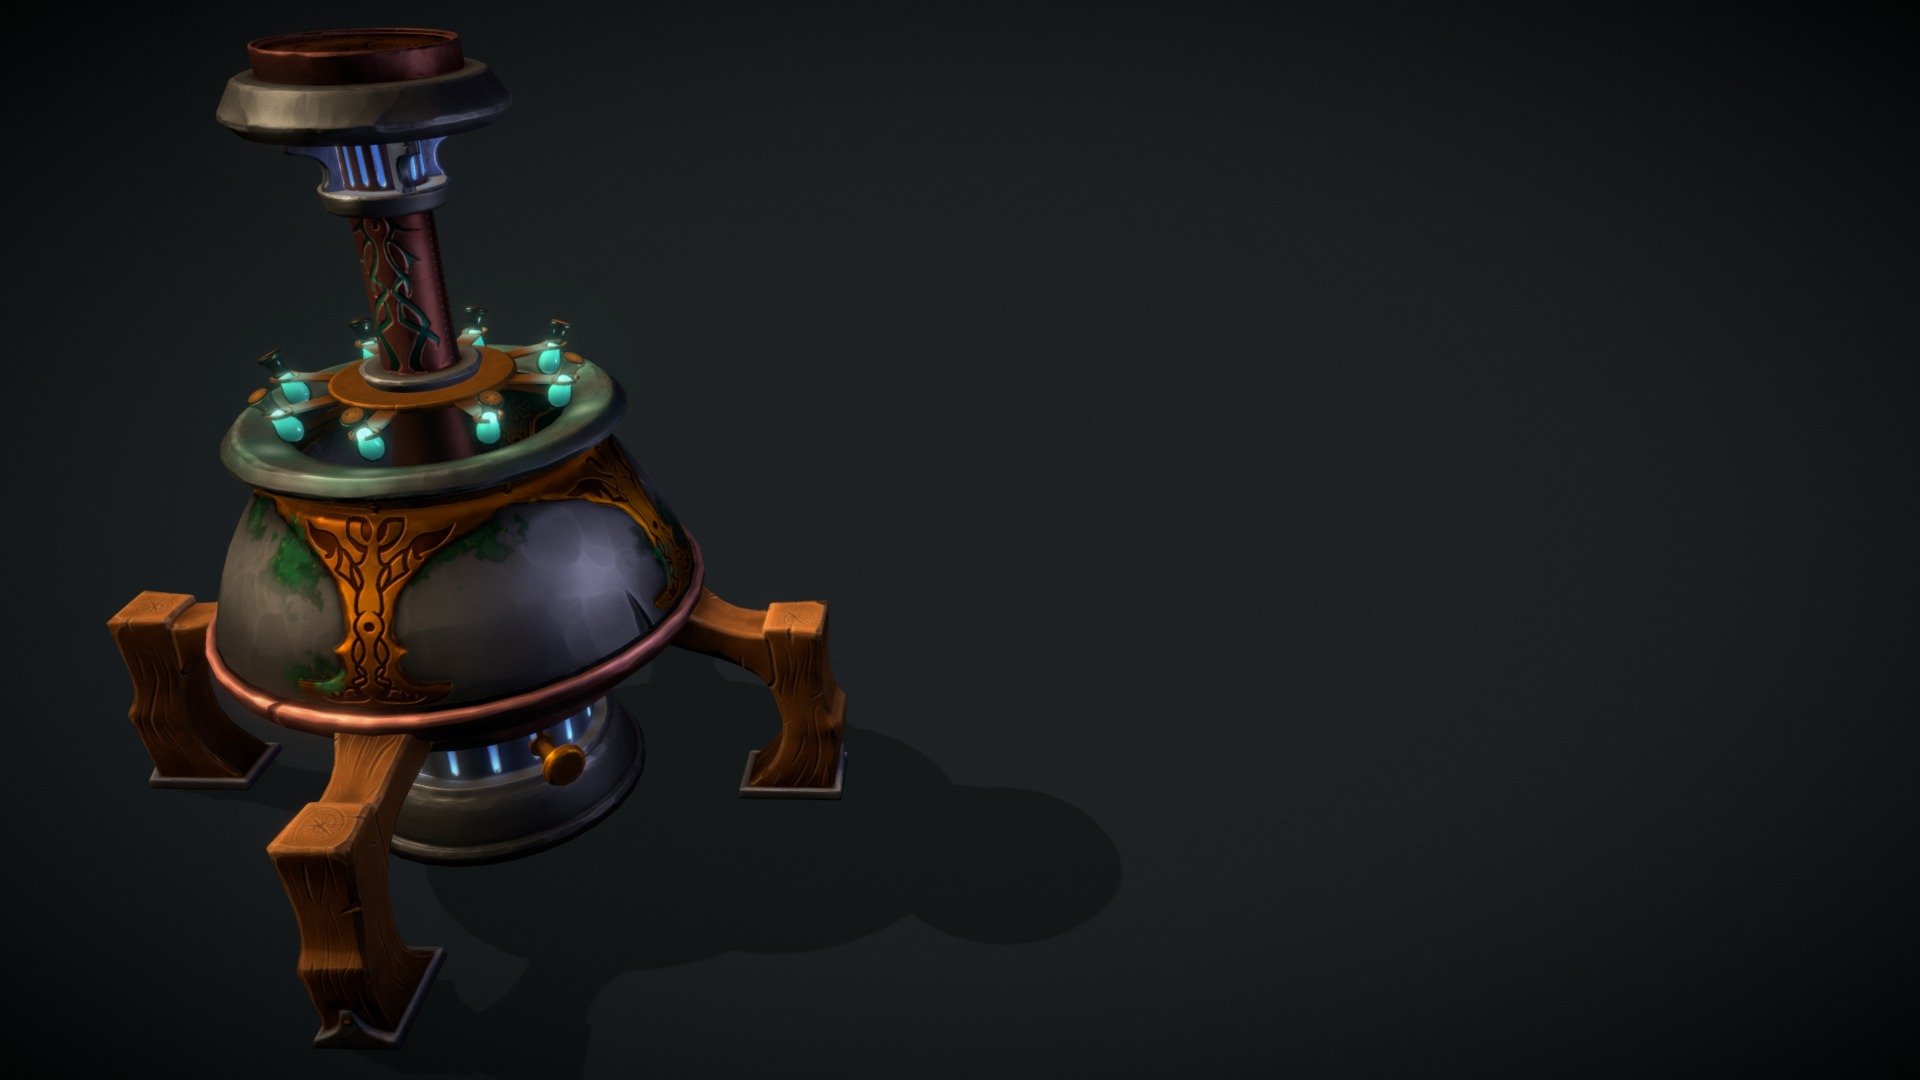 Made within a week , I tried to push as much as possible the texturing with Substance Painter ,

The original concept is from Maeve here :
https://www.artstation.com/artwork/AqrlRV - Magic Cauldron - Download Free 3D model by yuguhtrrh 3d model